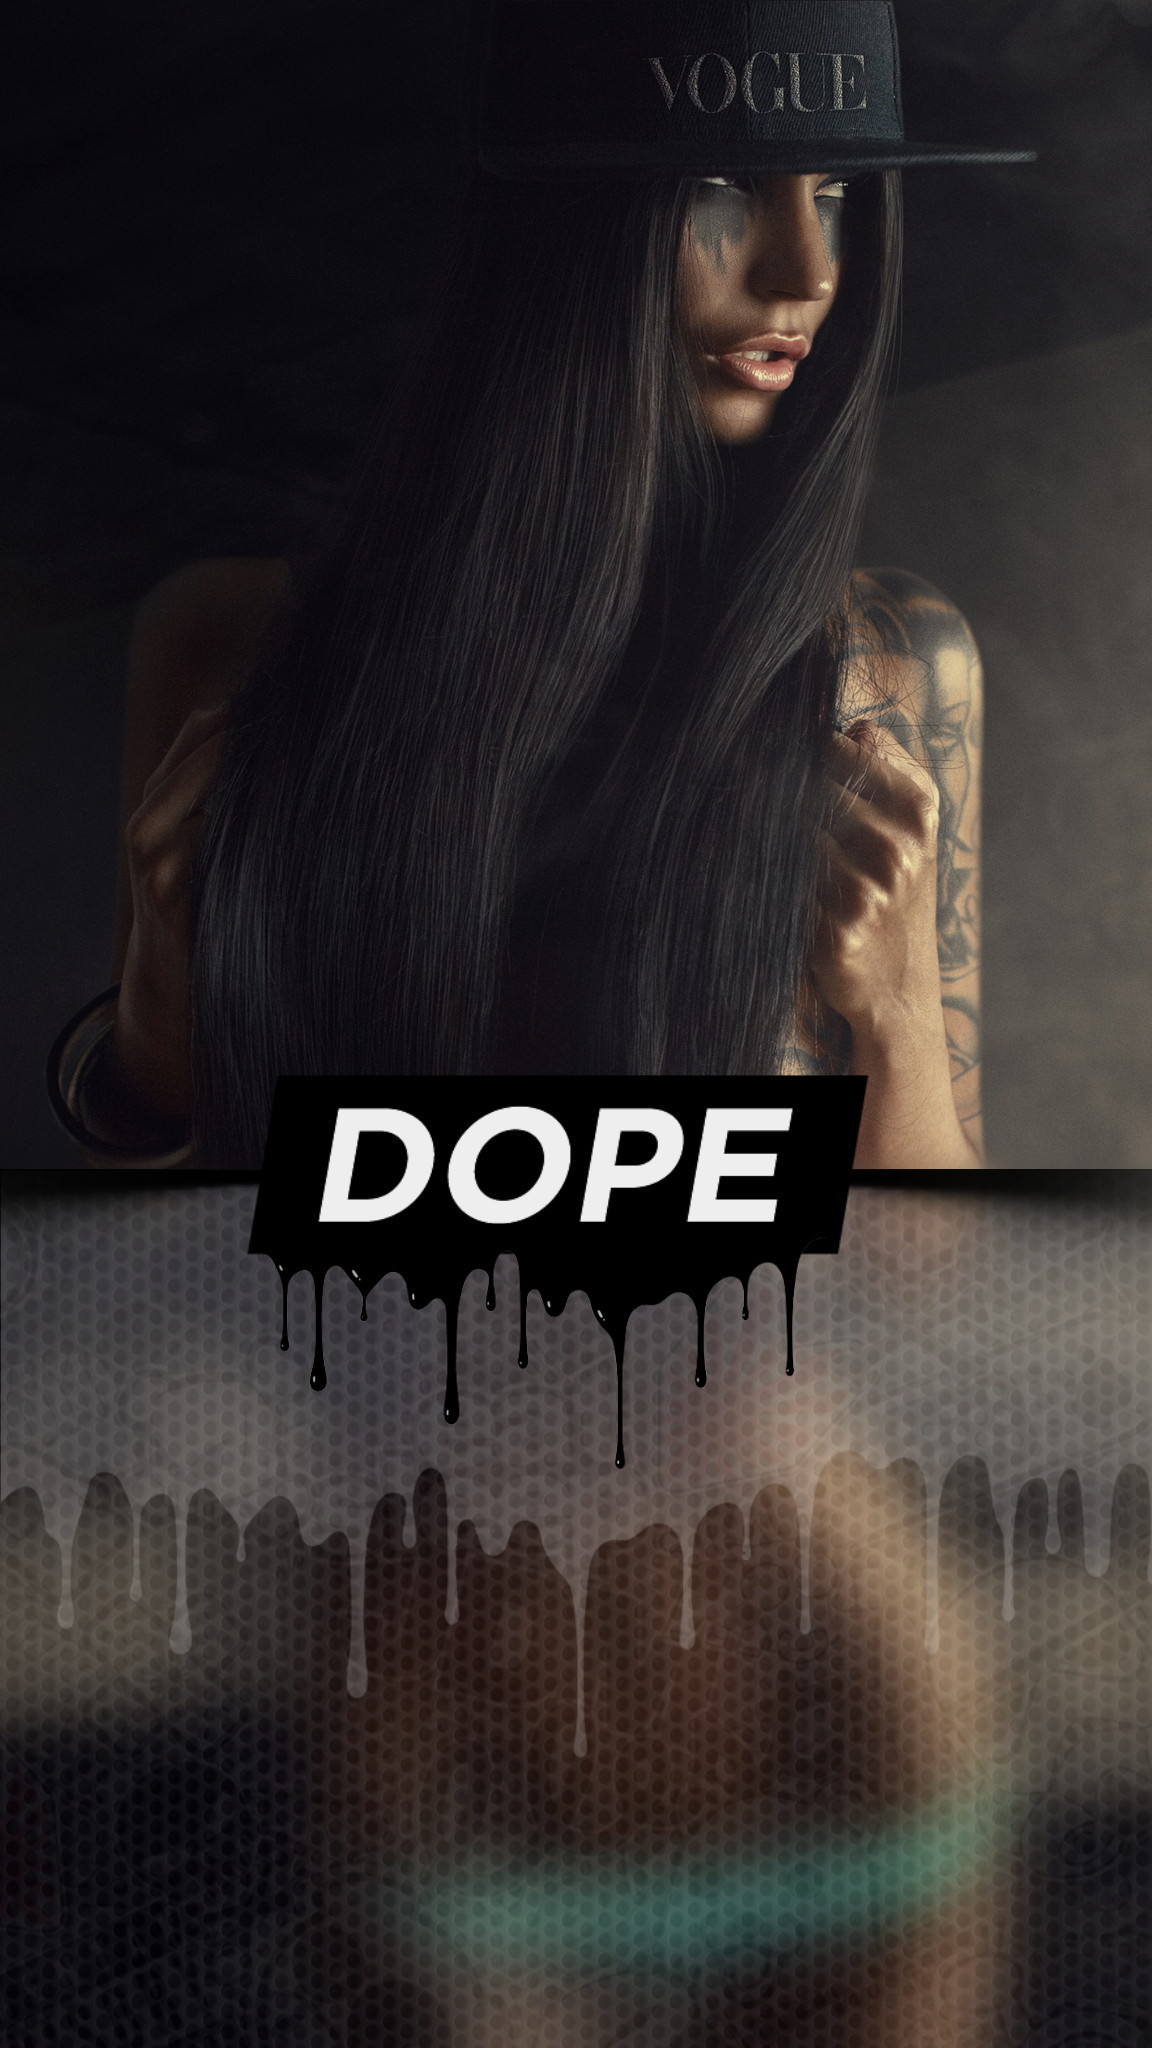 1152x2048 Girls Club, Bad Girls, Dope Wallpapers, Iphone Wallpapers, Art Girl,  Gangsta Girl, Sexy, Chicano, Hiphop